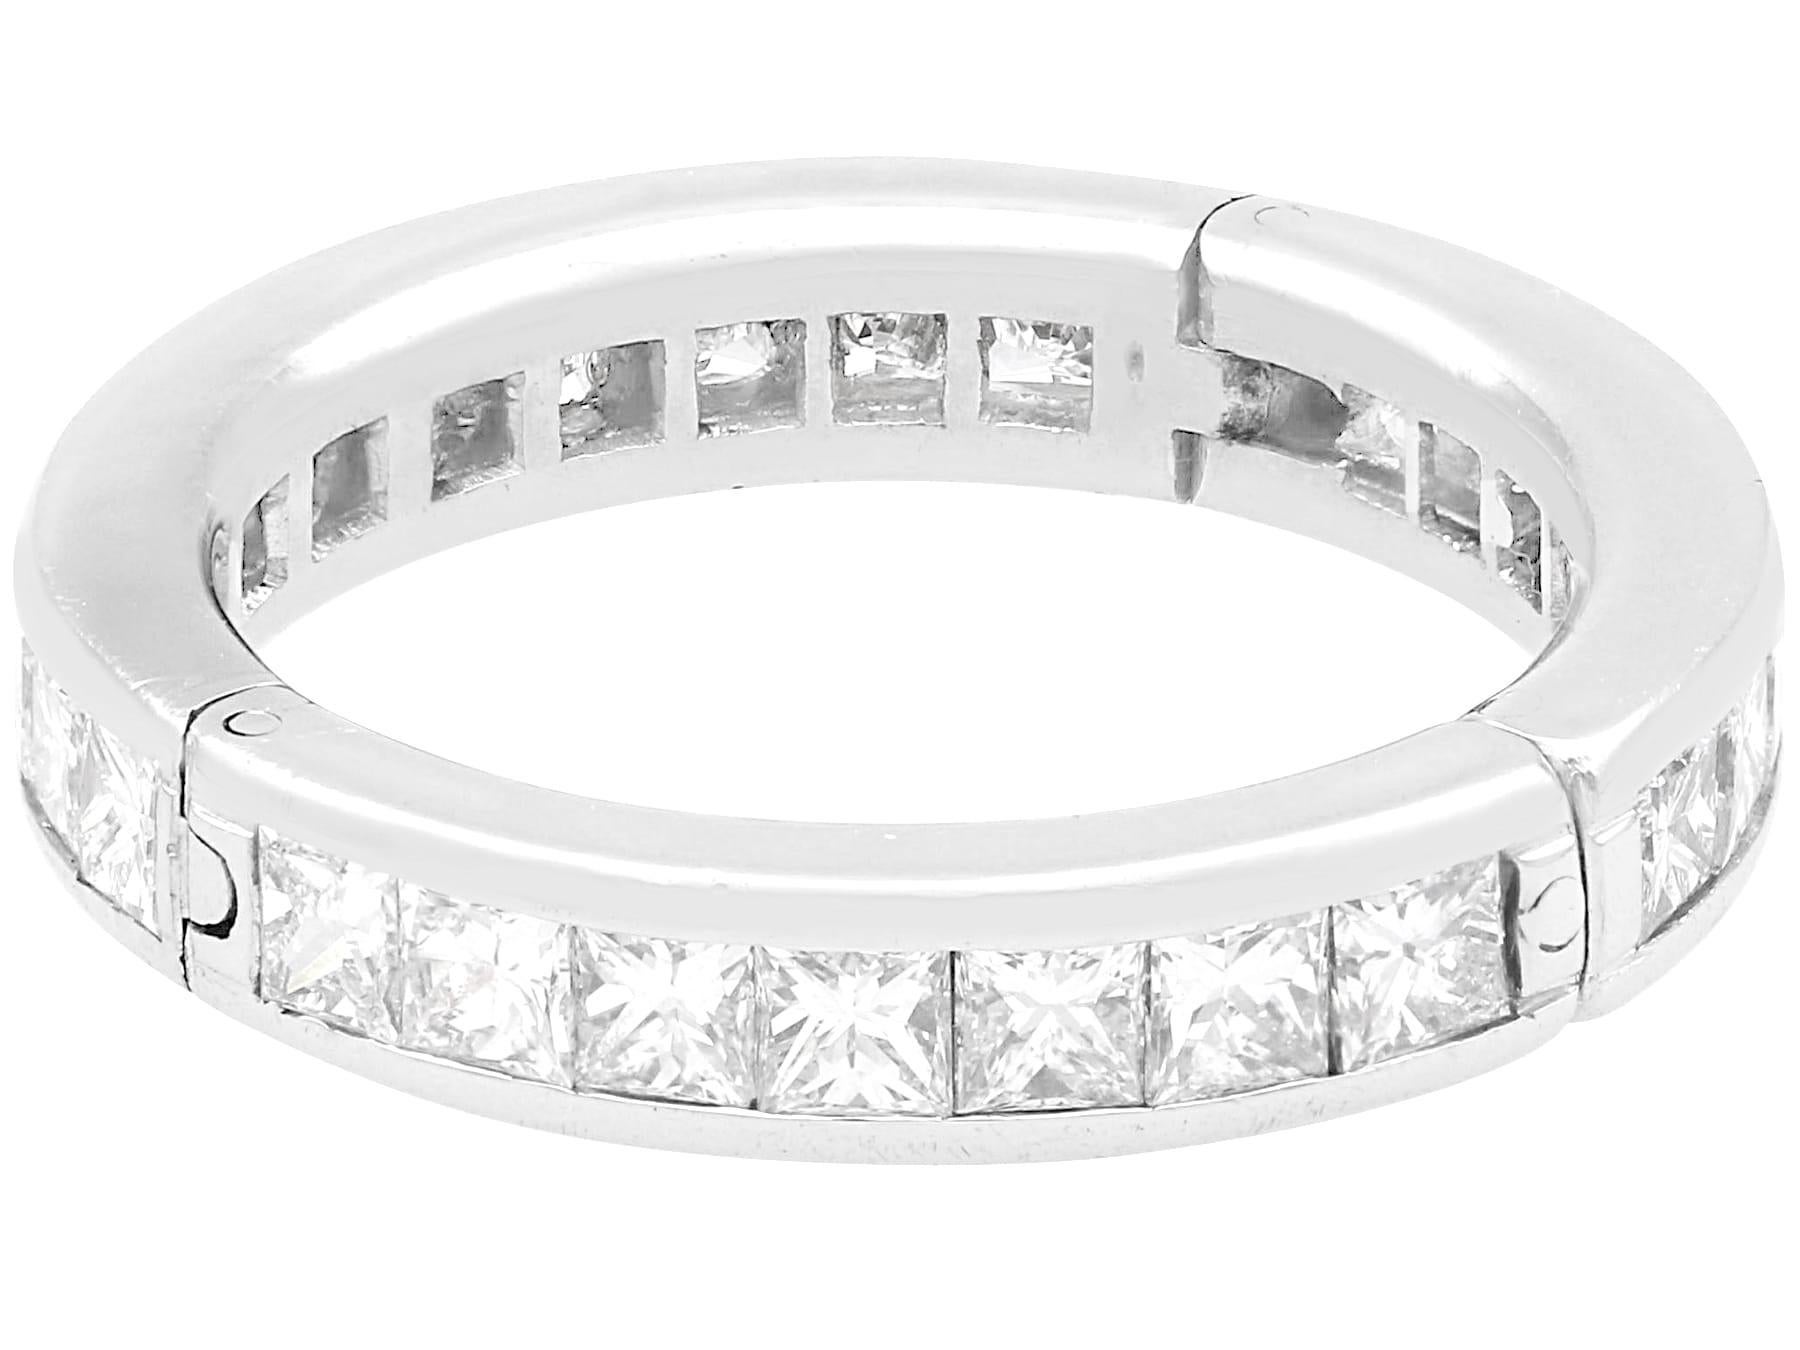 A stunning, fine and impressive vintage 4.10 carat diamond and 18 karat white gold eternity ring; part of our diverse collection of diamond rings

This stunning, fine and impressive vintage eternity ring has been crafted in 18k white gold.

The full